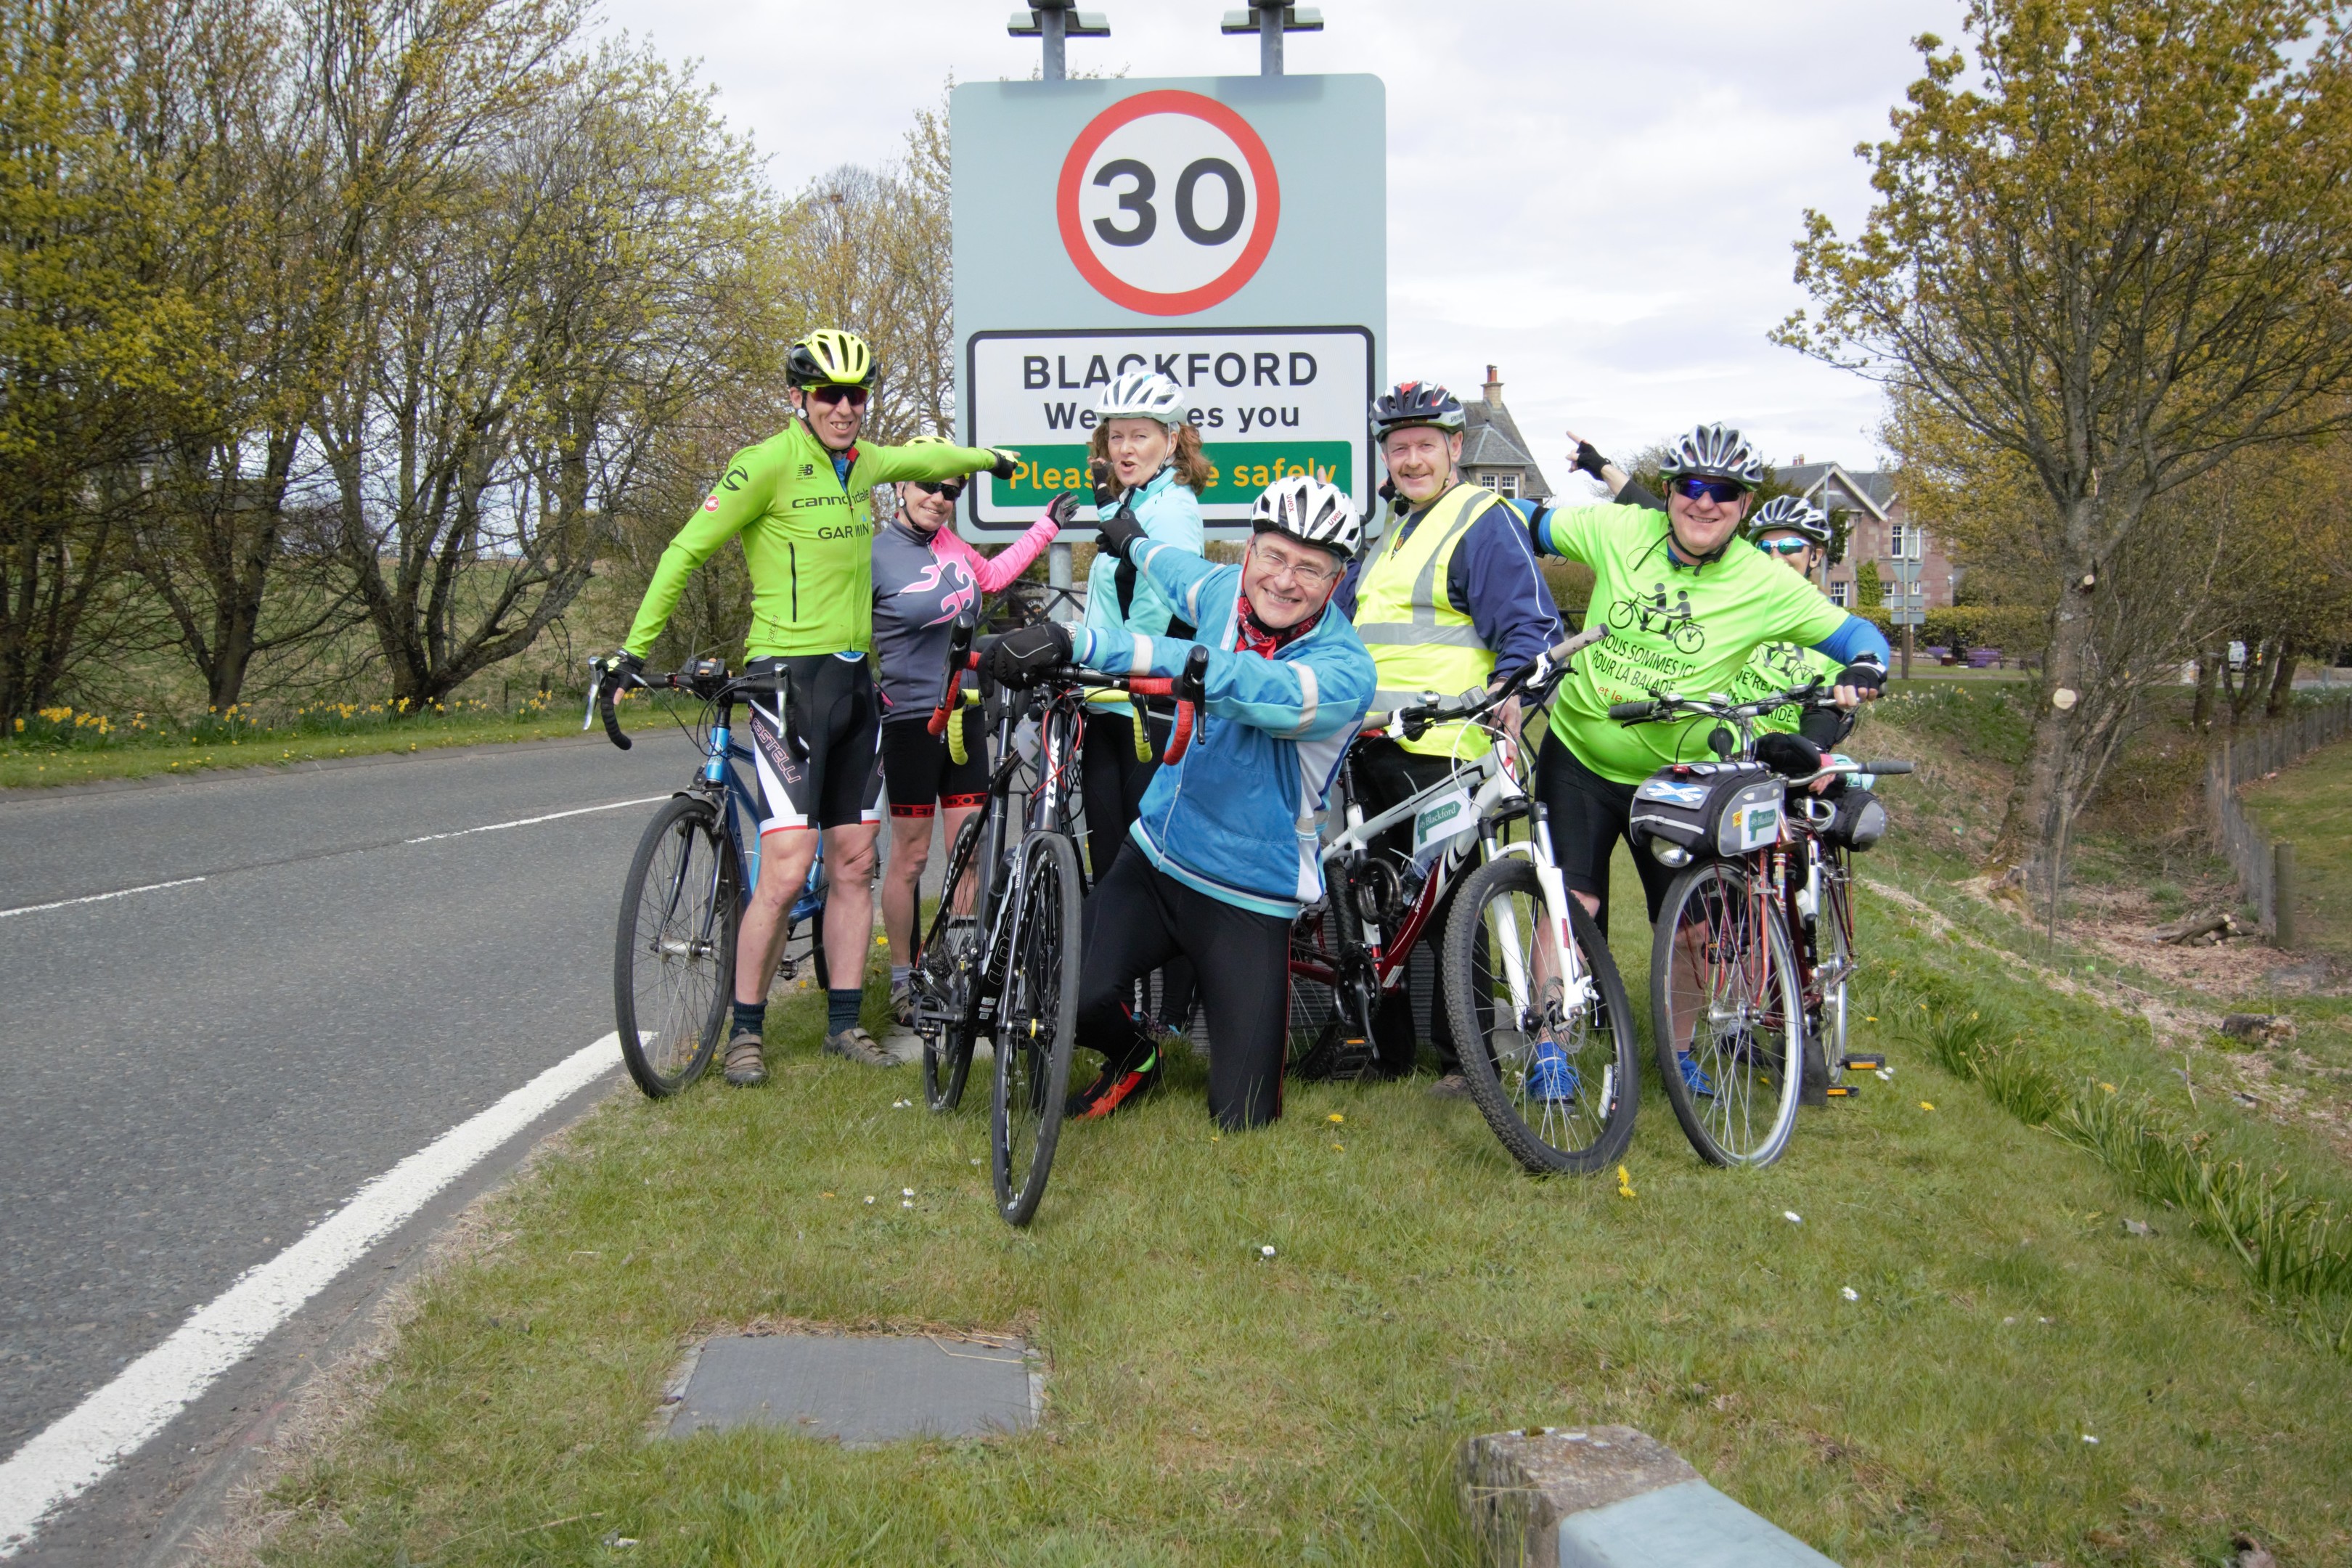 Cyclists, take to the streets of Blackford to publicise the path project drop-in event and survey.